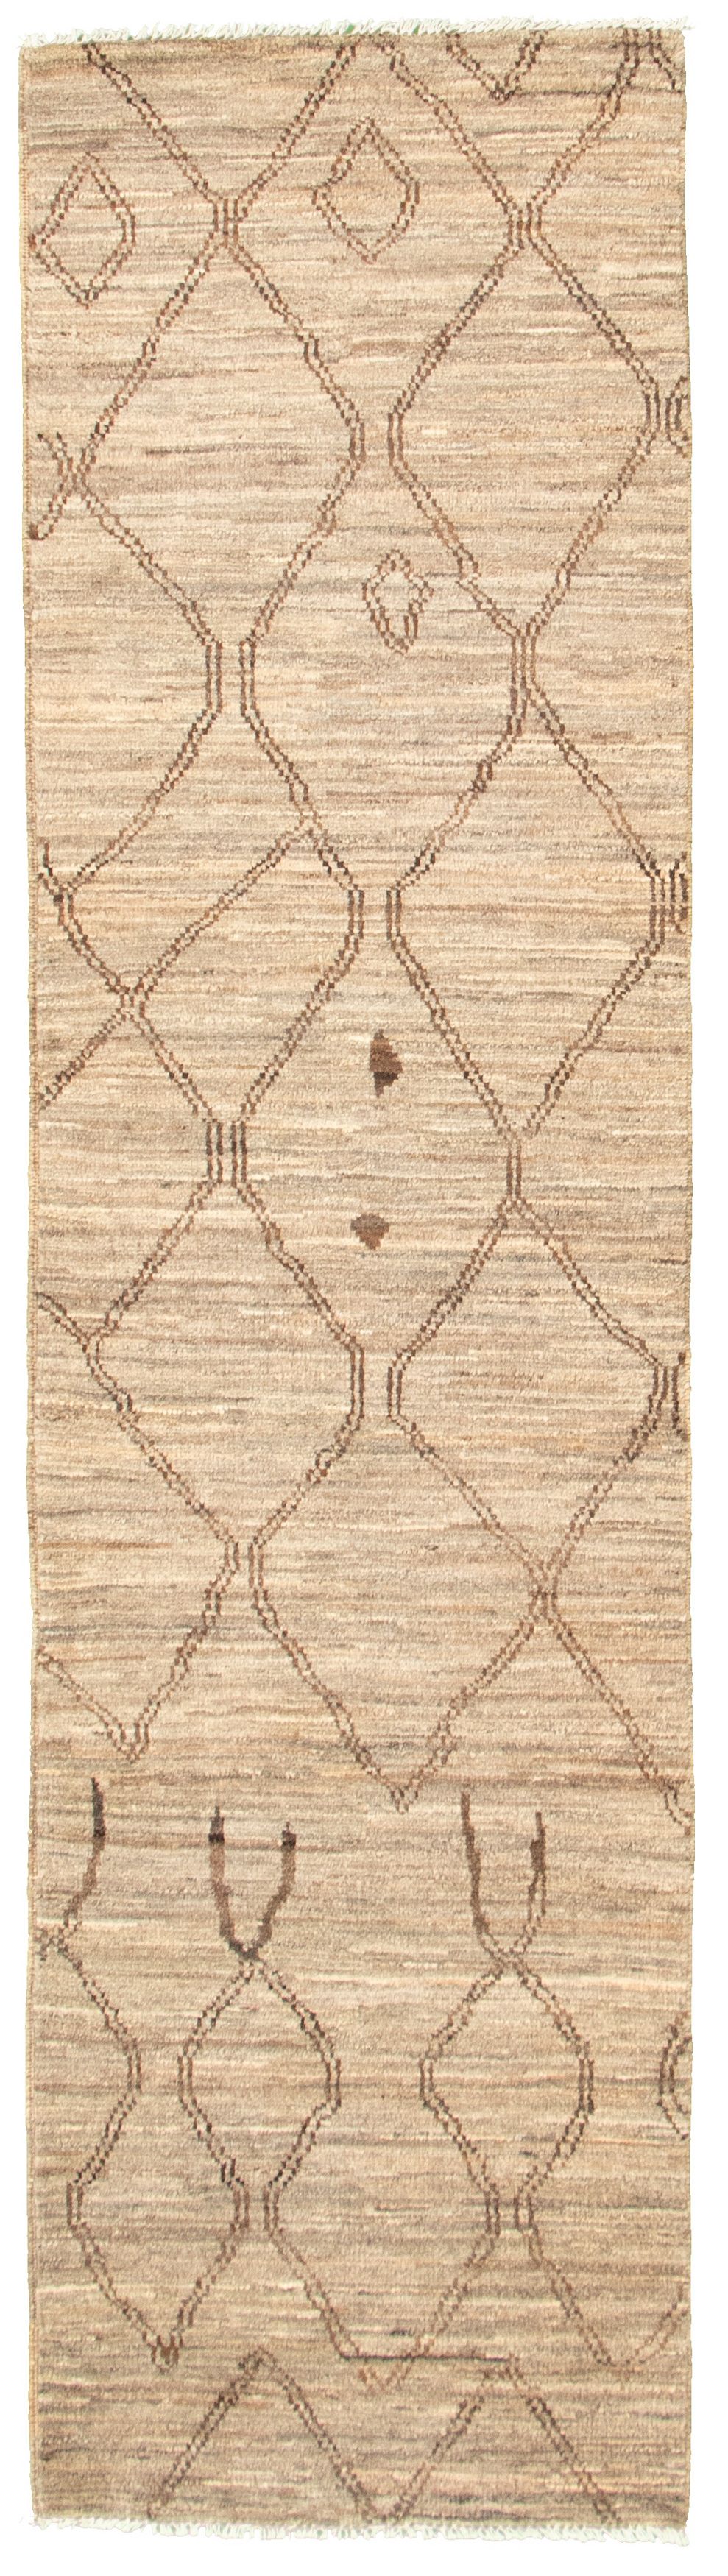 Hand-knotted Marrakech Grey Wool Rug 2'7" x 9'9" Size: 2'7" x 9'9"  